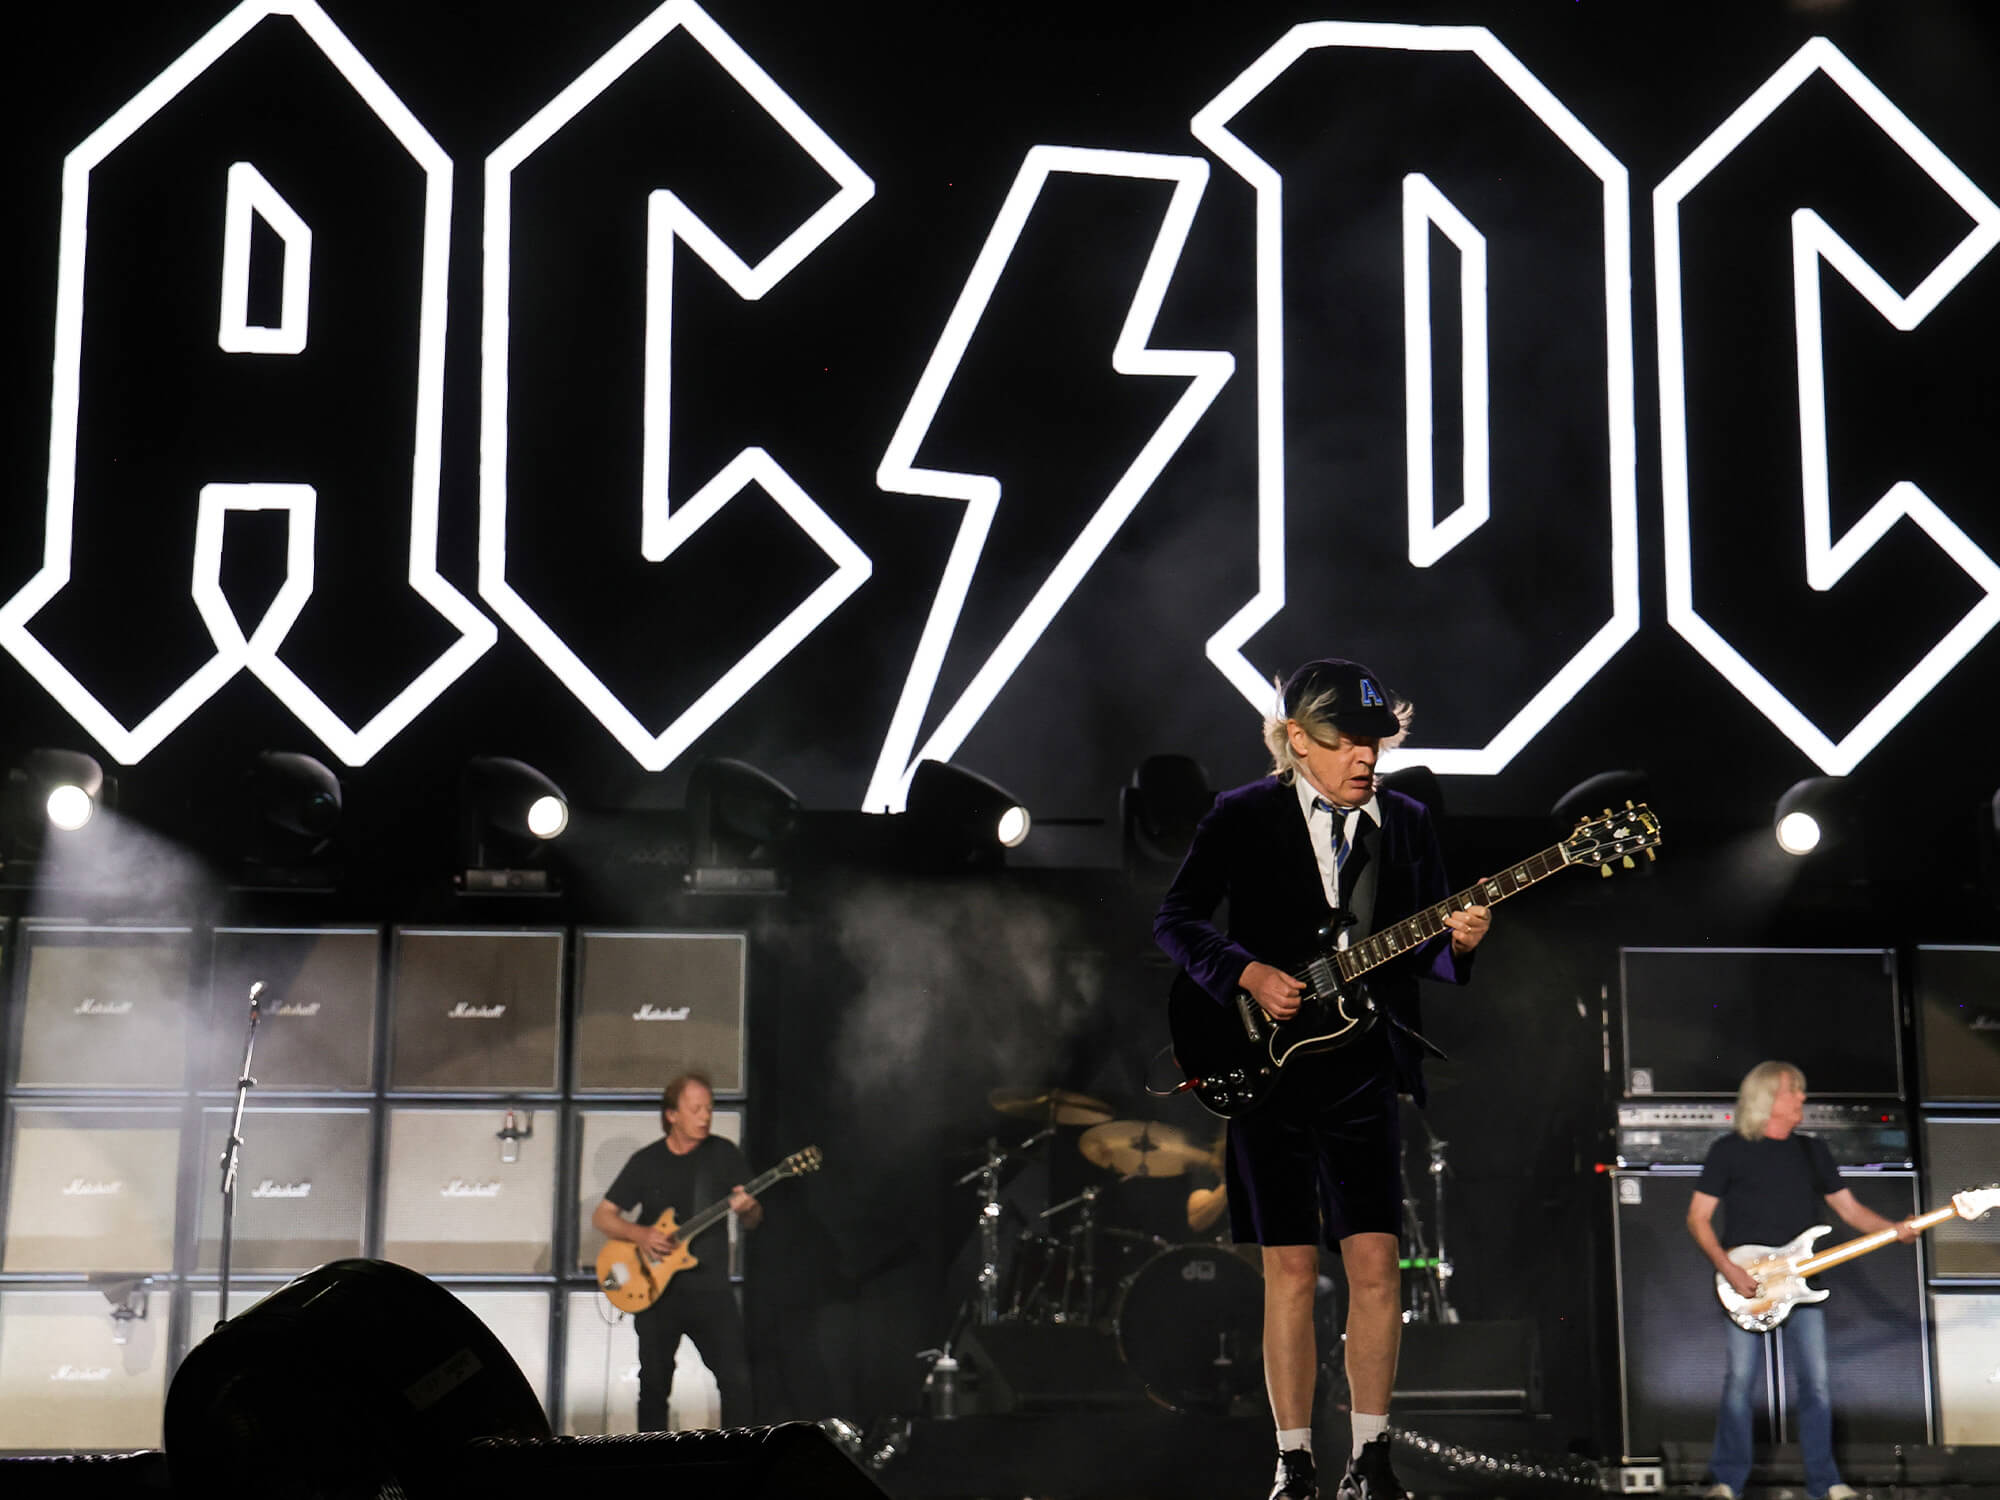 Angus Young playing his SG guitar before a huge AC/DC logo at Power Trip festival